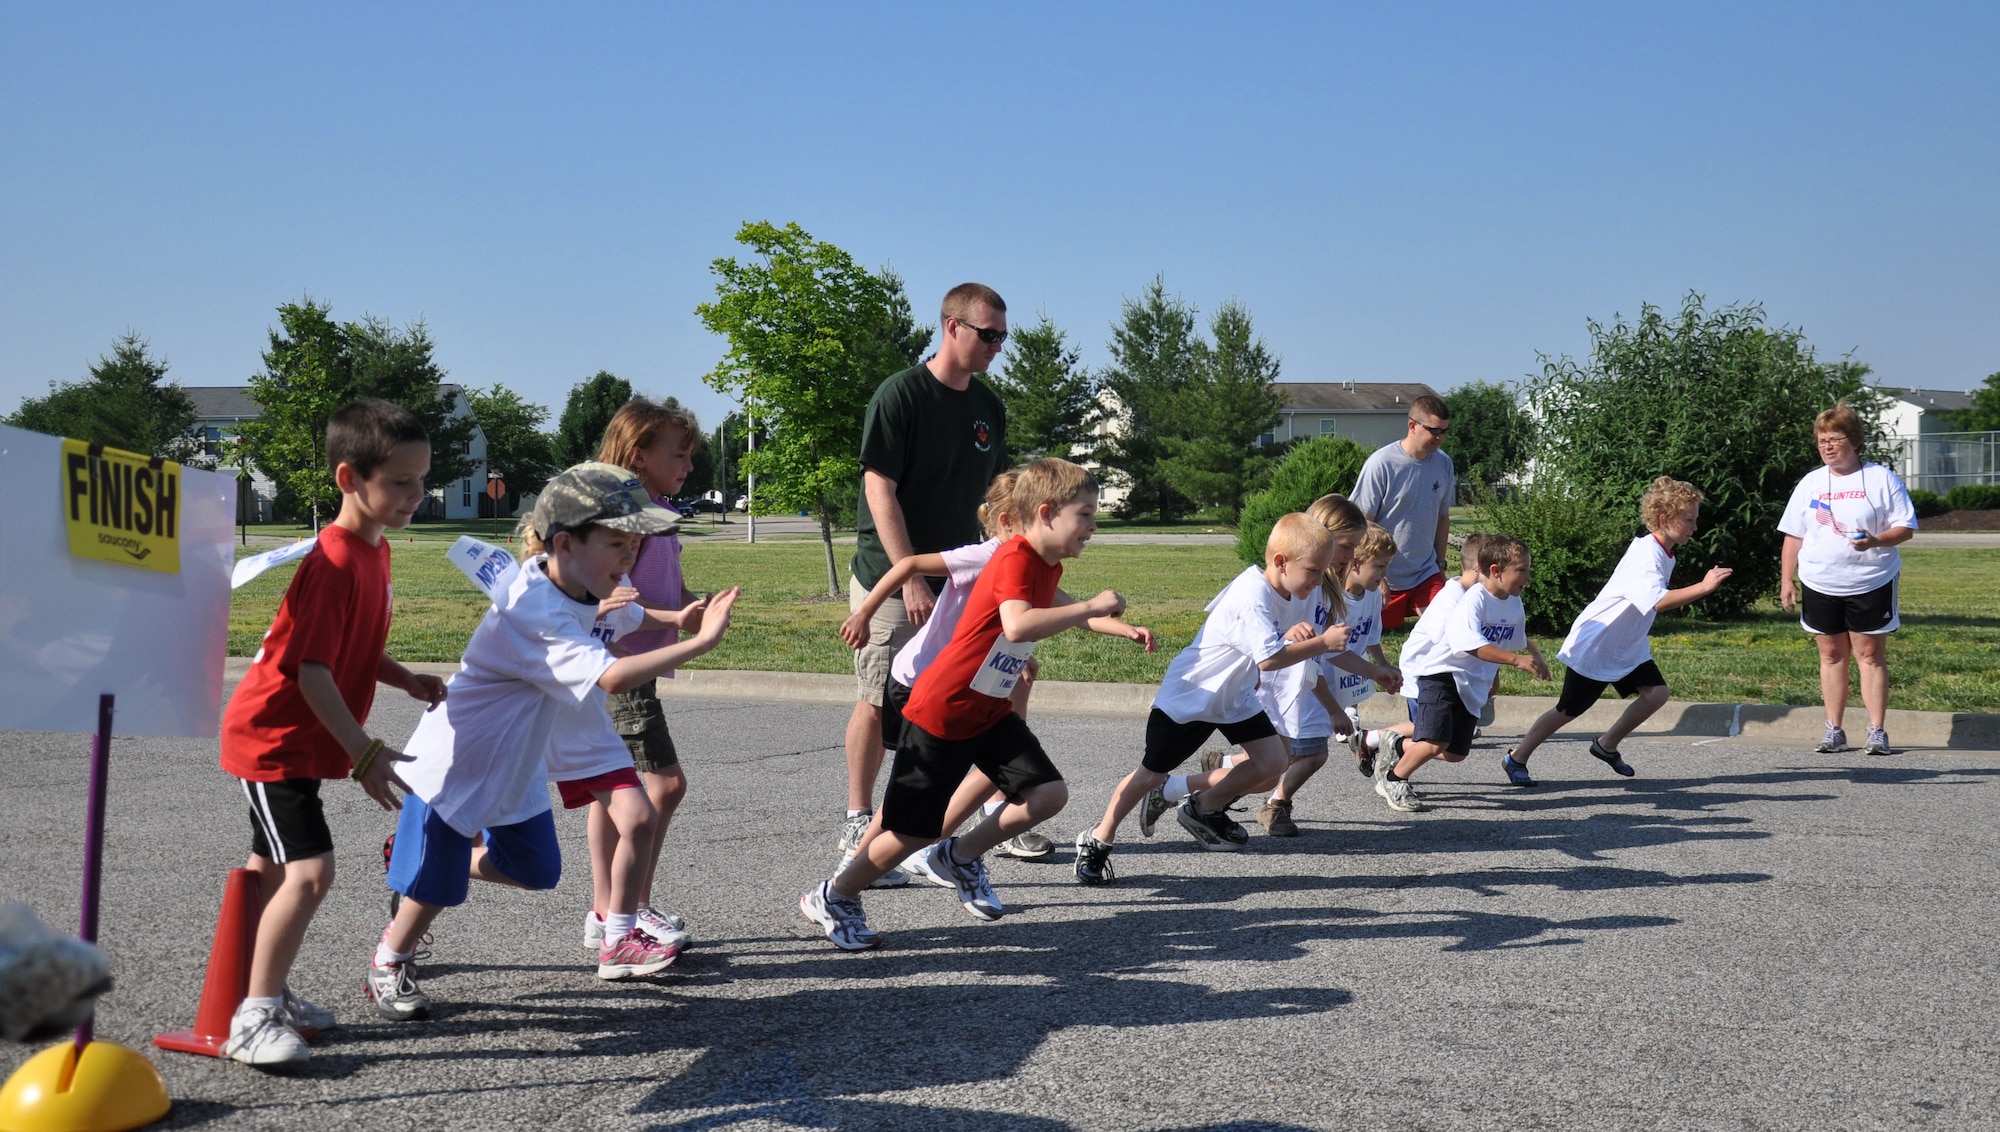 Children that participated in the America Kid’s Run start the mile run at Scott May 19.  The run started at the Youth Center, went around Patriots Landing then ended at the Youth center. Children from the ages of 5 to 8 ran half a mile, 9 and 10 year olds ran 1 mile, and 11 and up ran two laps around Patriots Landing.(U.S. Air Force photo/Airman 1st Class)